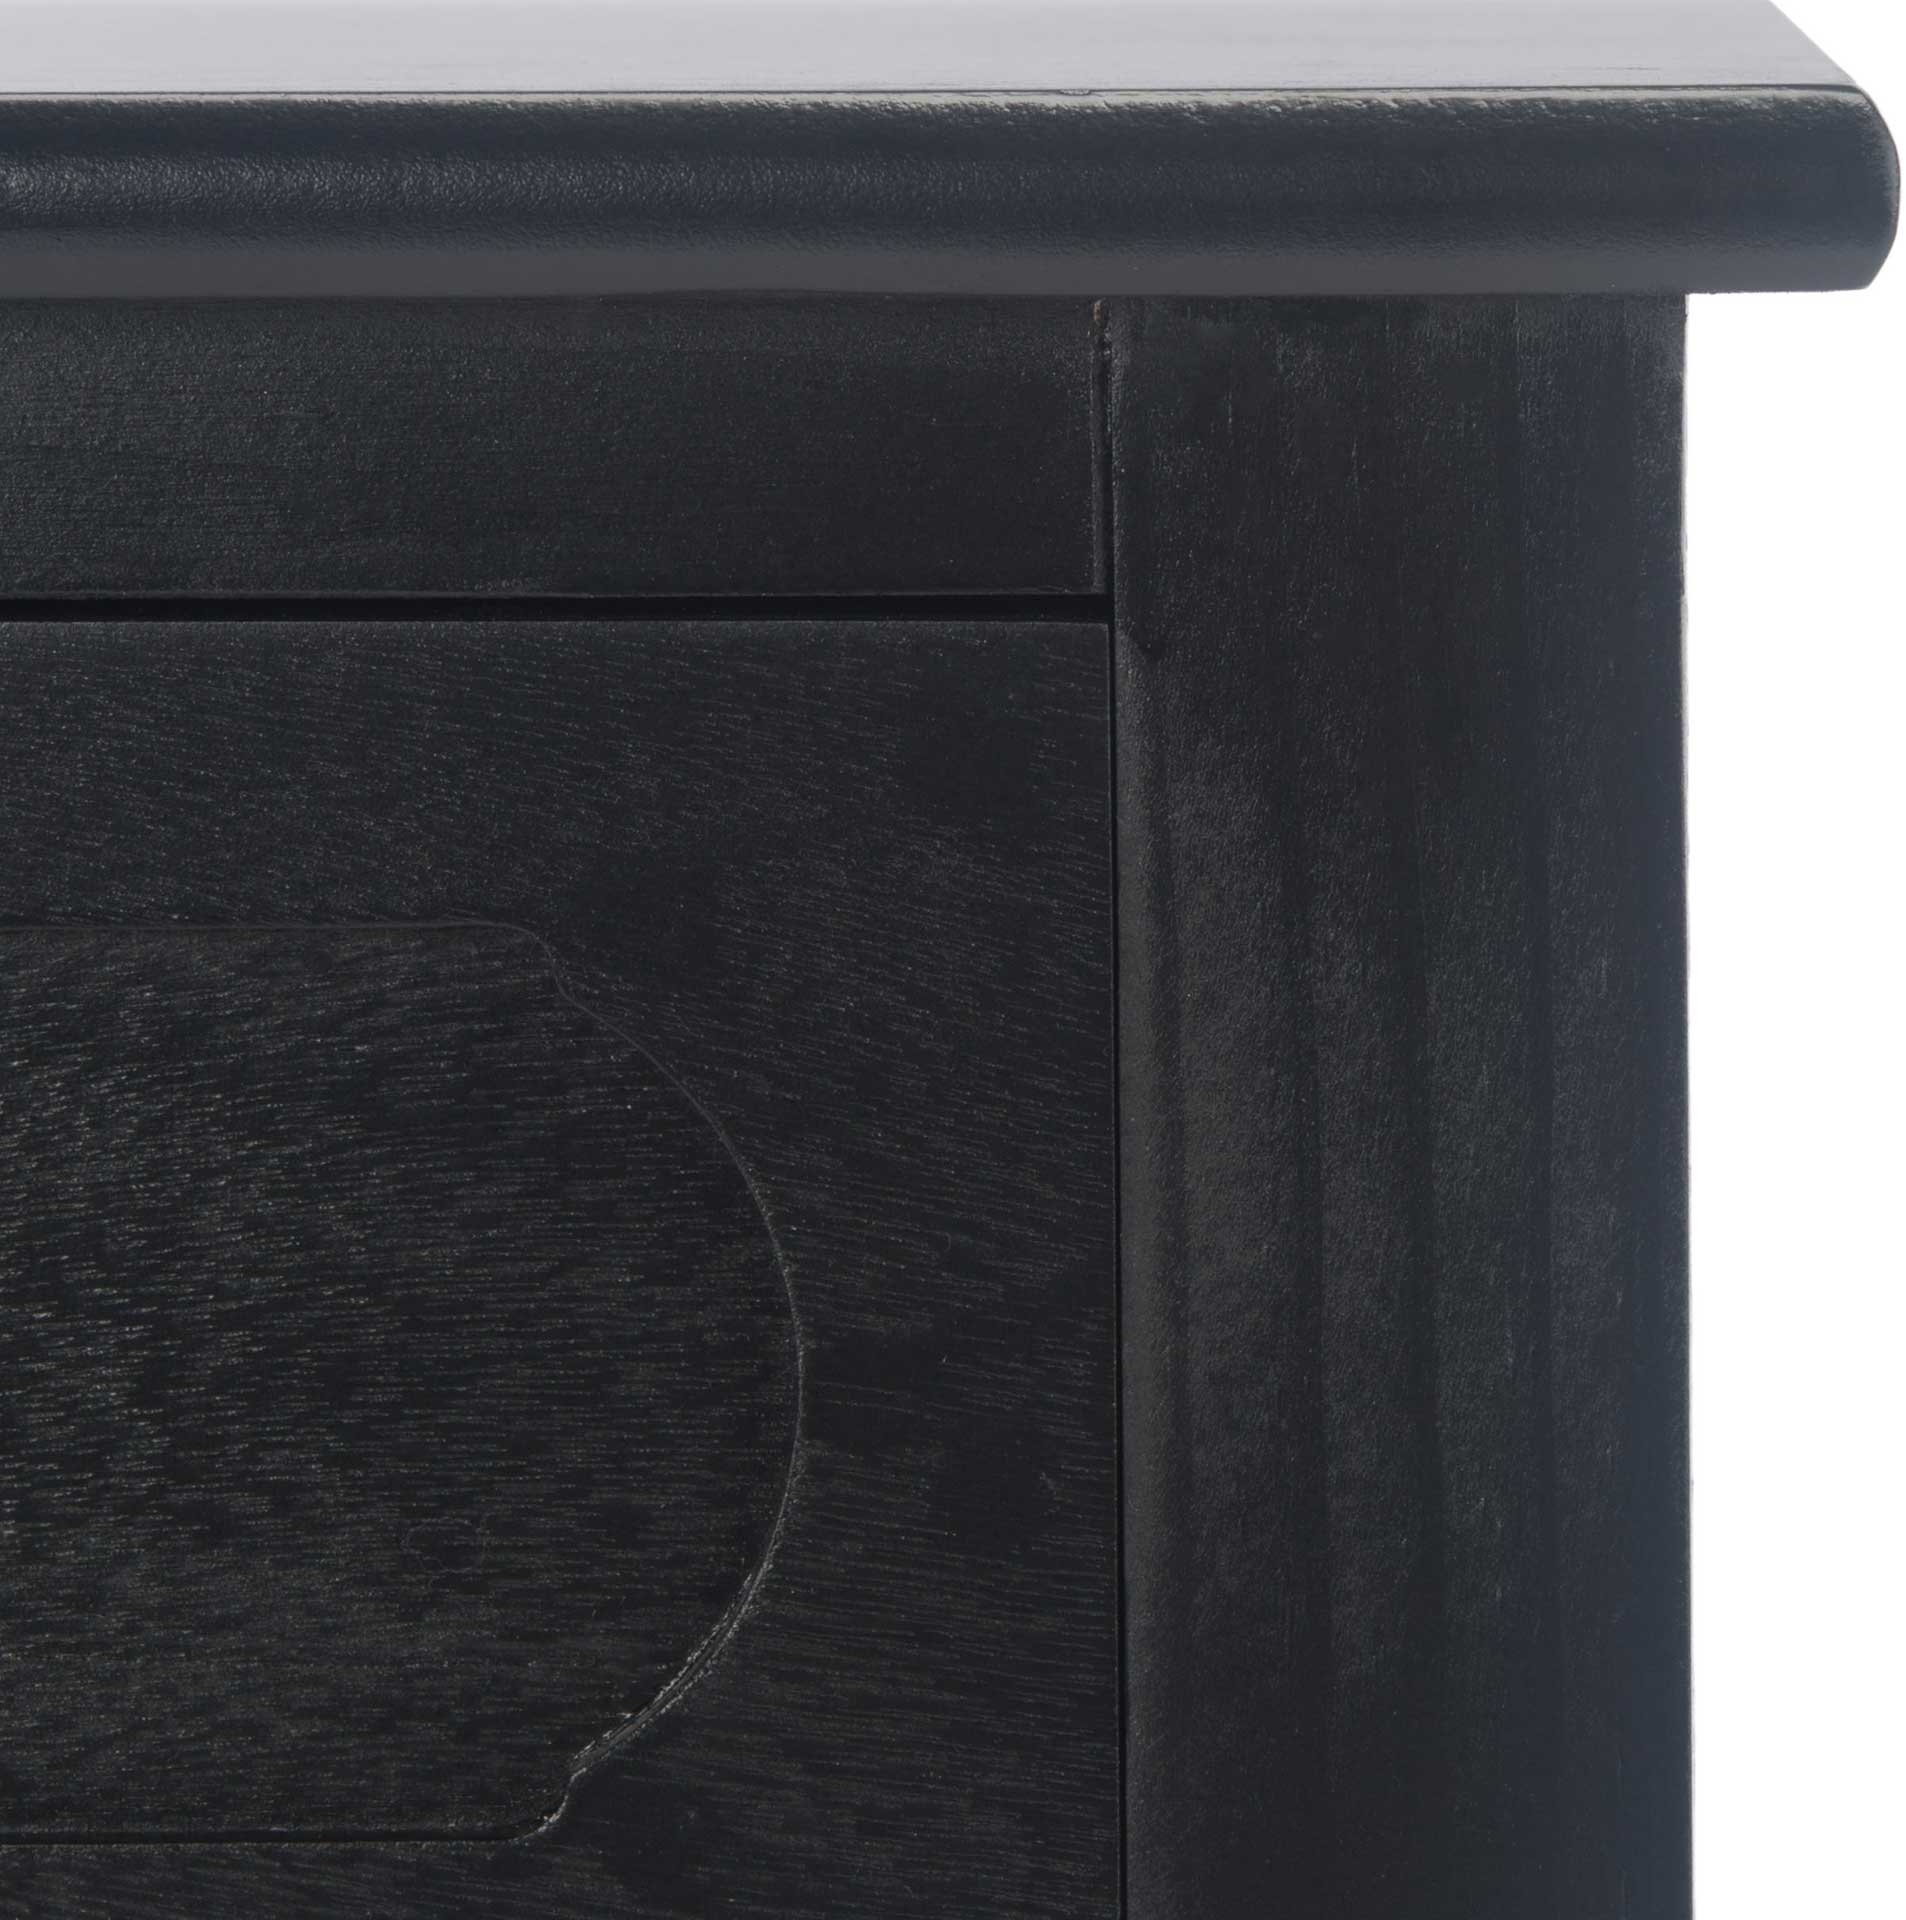 Alessa 2 Drawer Console Table Black